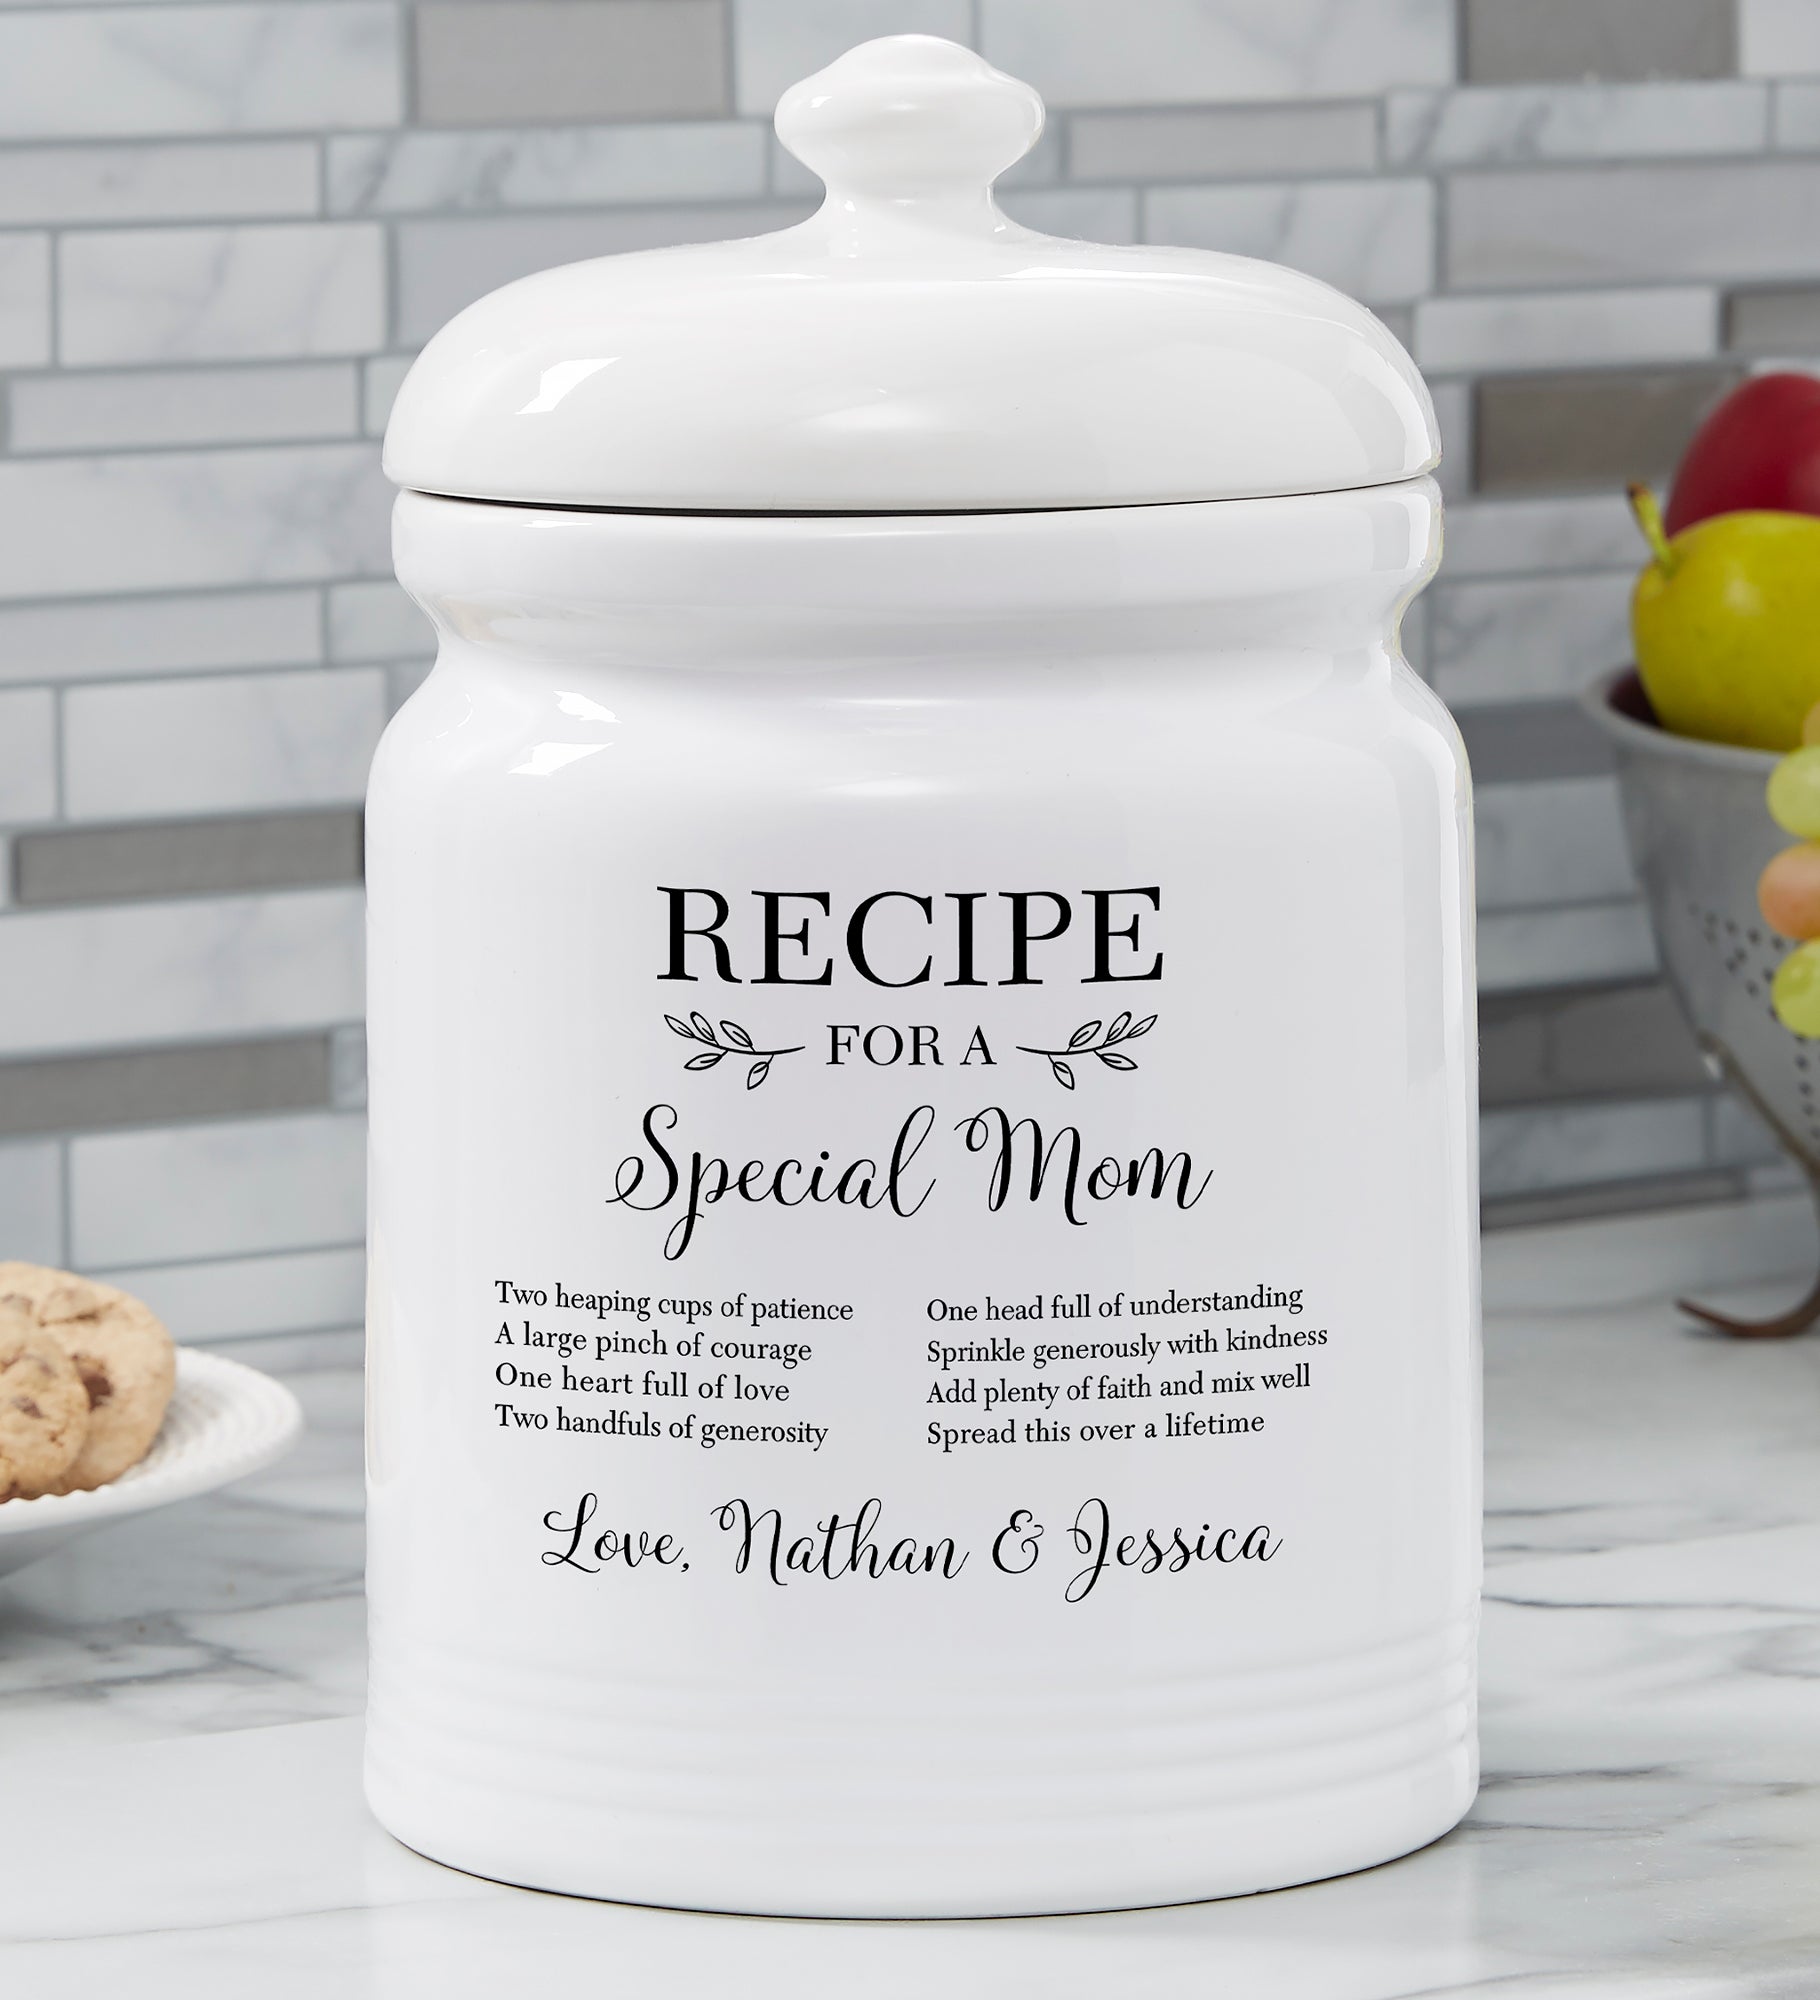 Recipe For a Special Mom Personalized Cookie Jar